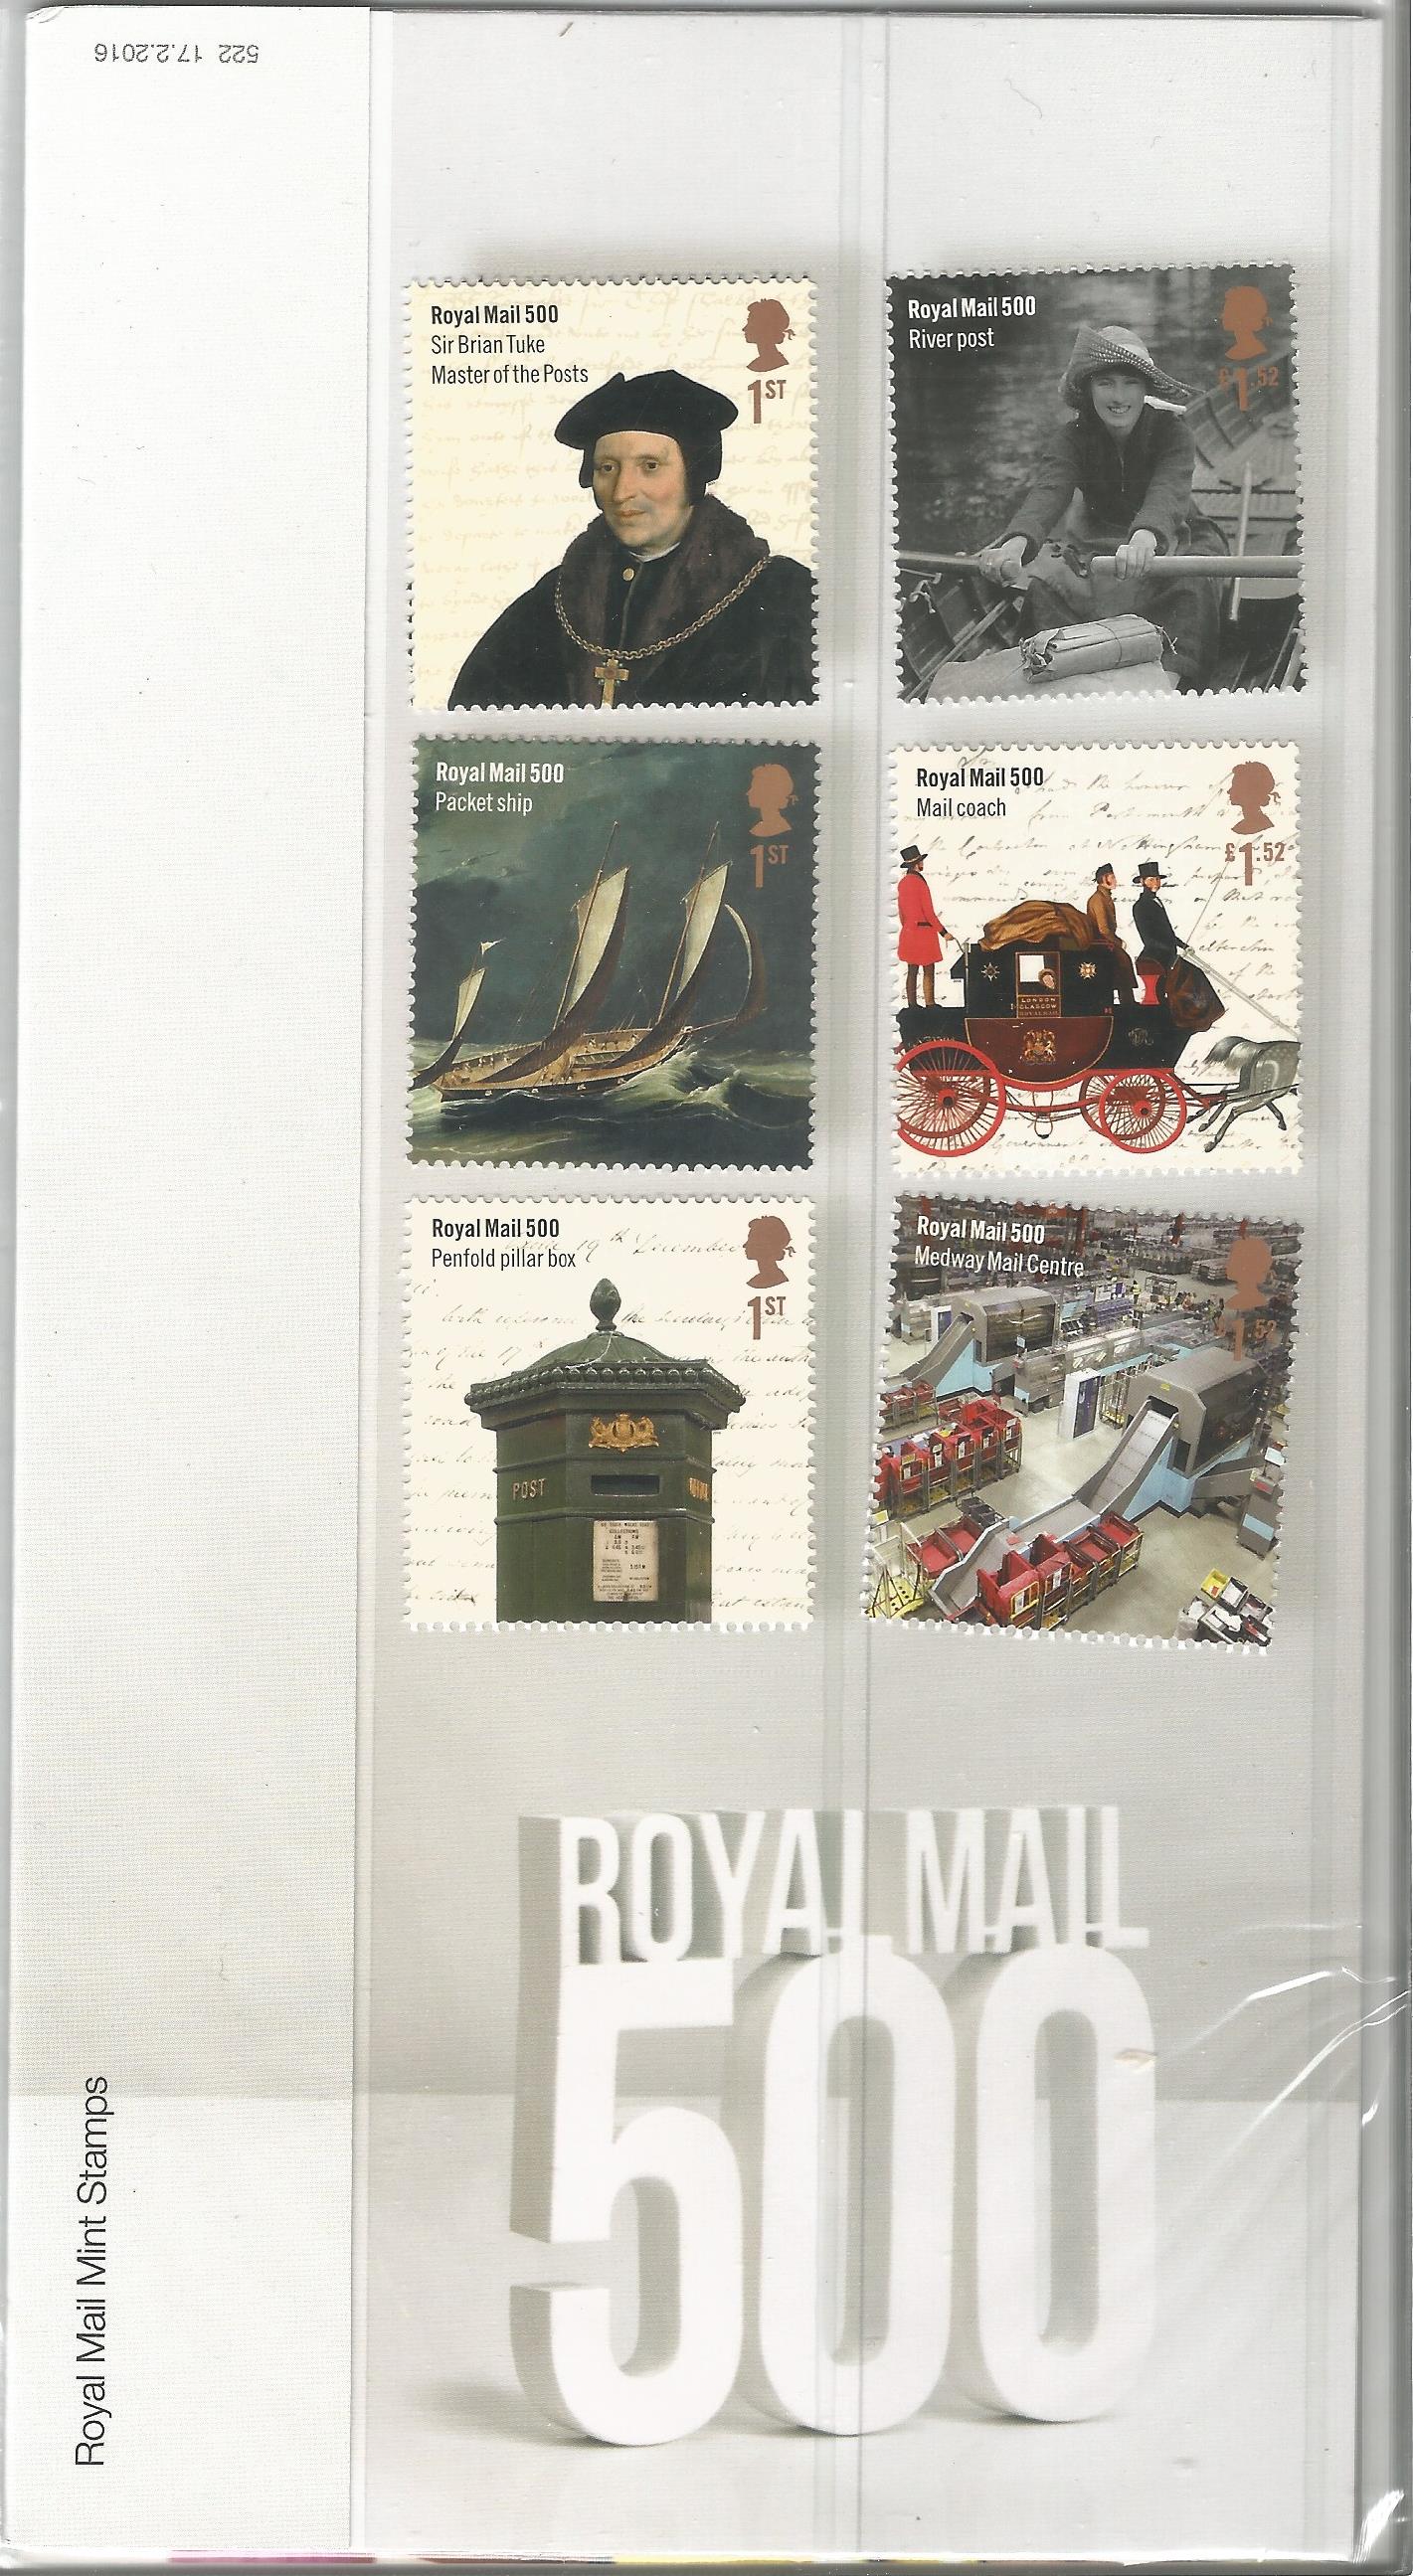 GB mint stamps Presentation Pack no 522 Royal Mail 500 2016. Good condition. We combine postage on